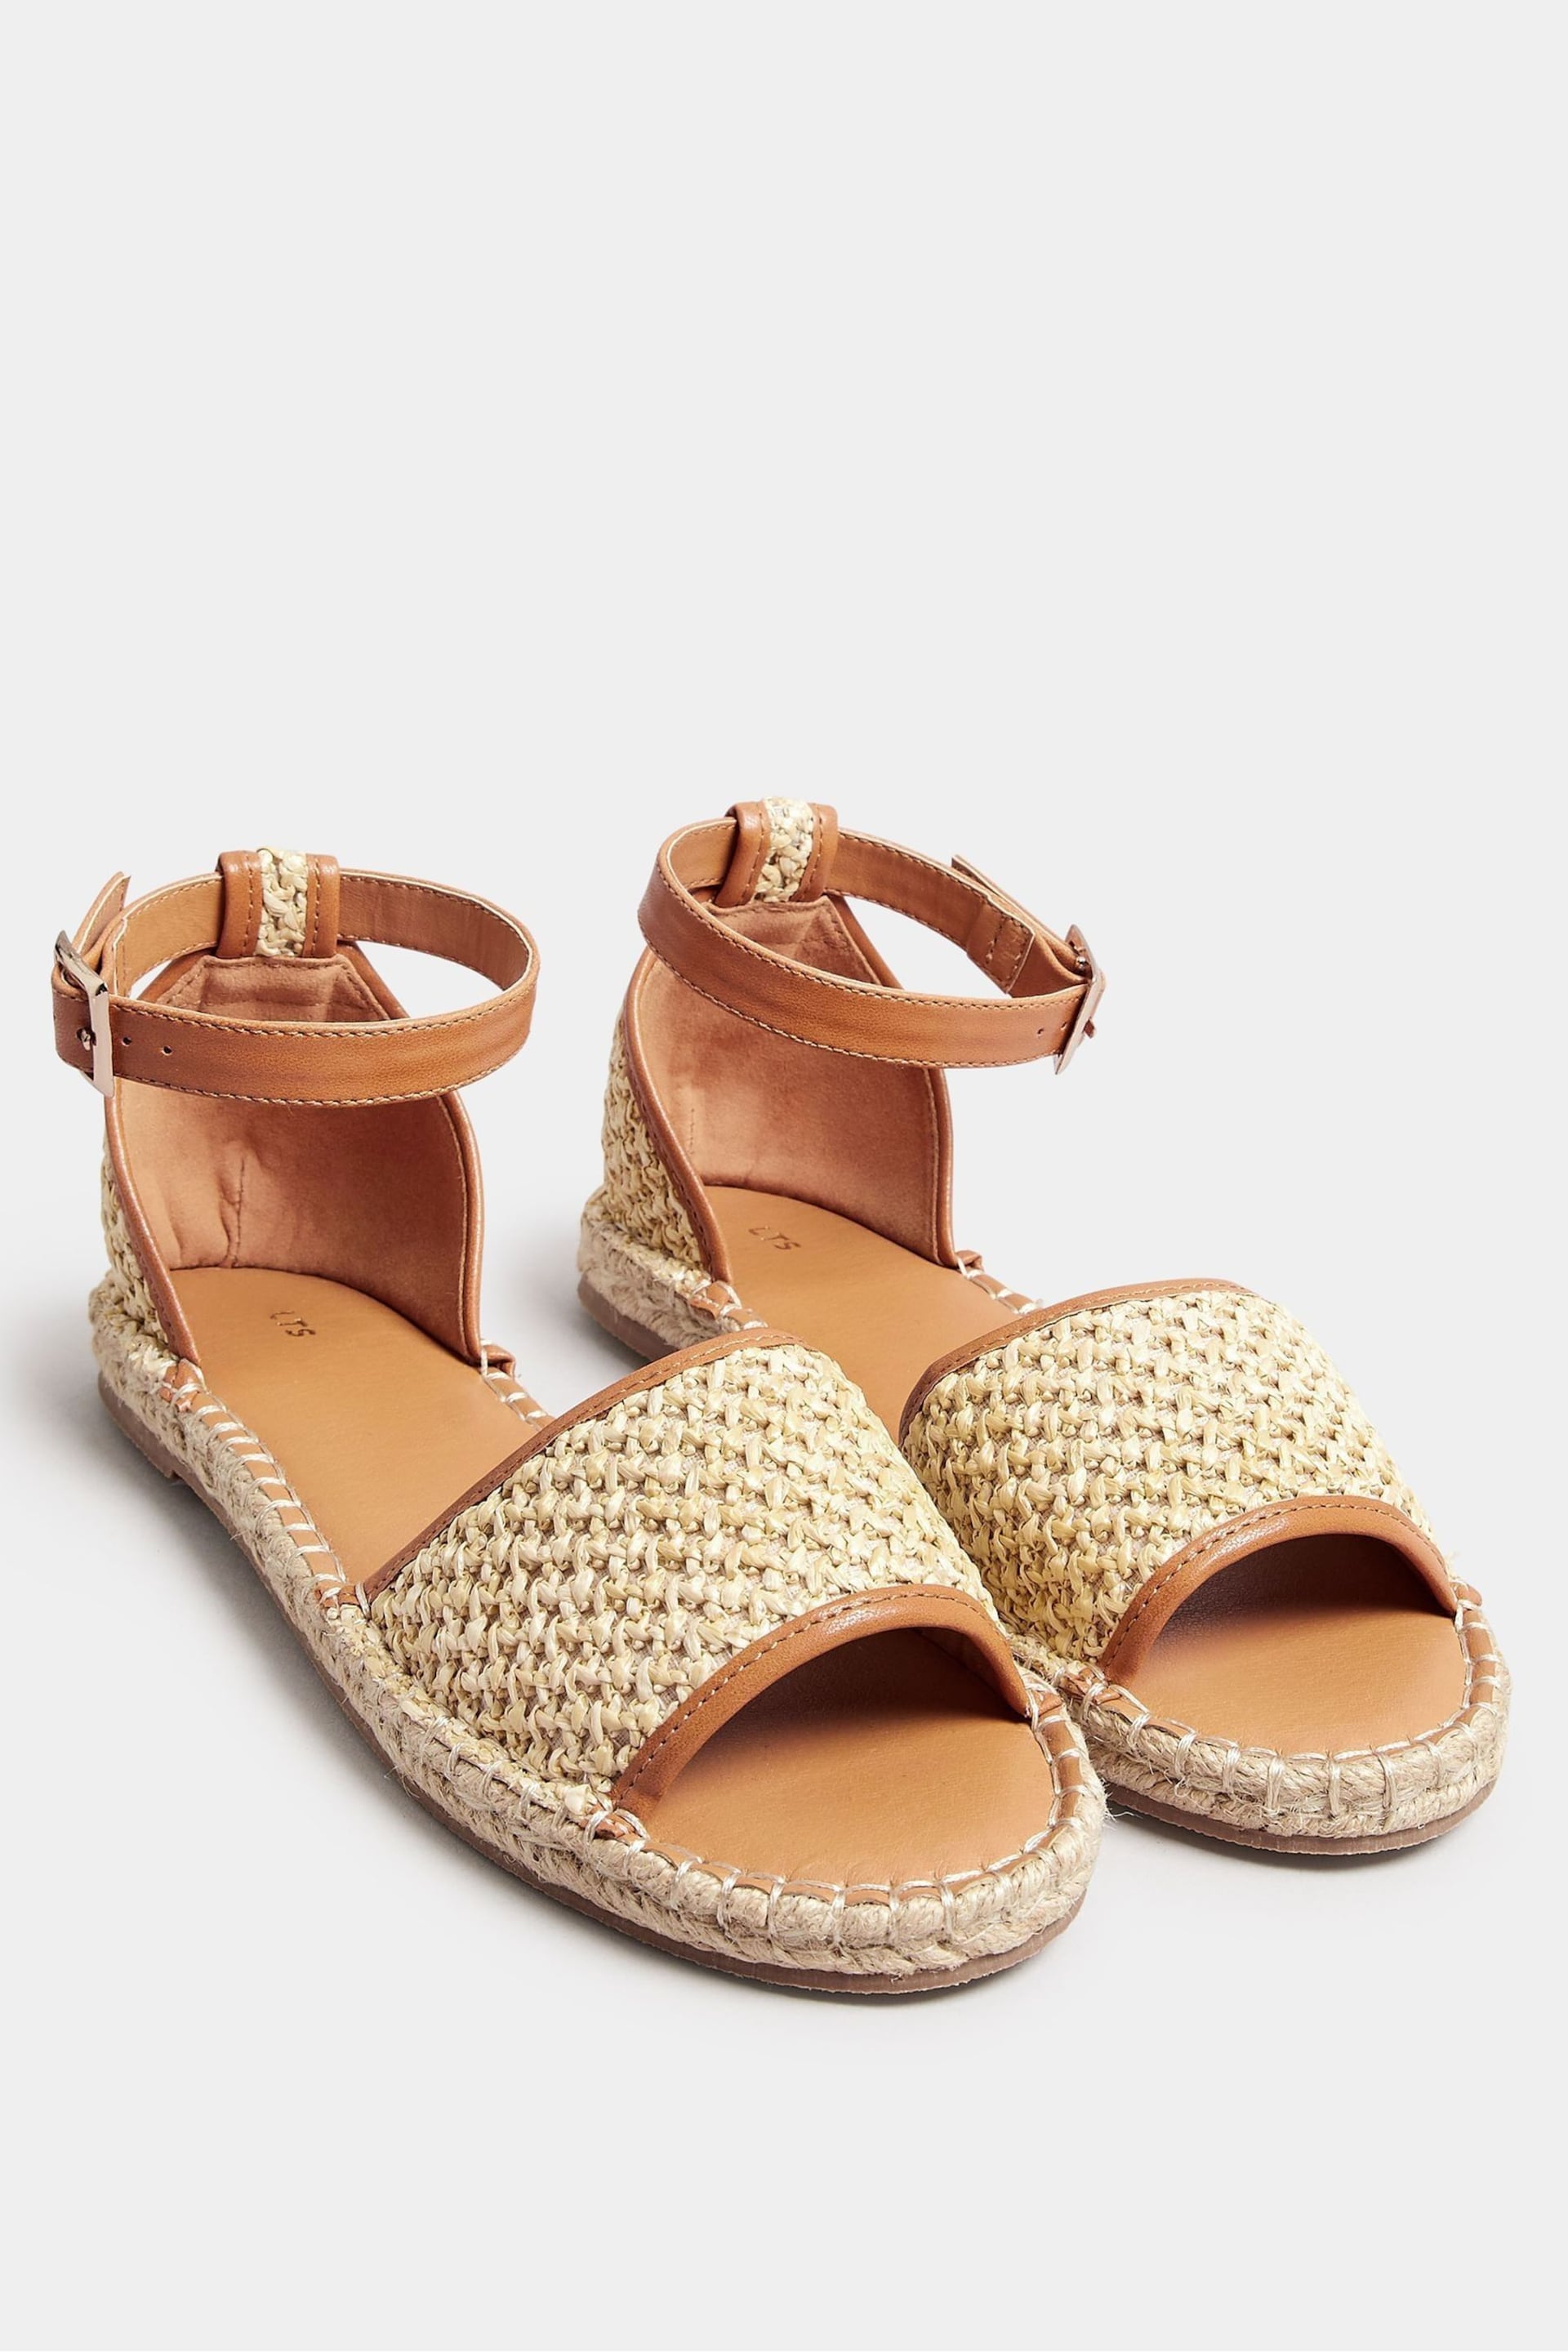 Long Tall Sally Natural Espadrille Open Toe Sandals In Standard Fit - Image 1 of 5